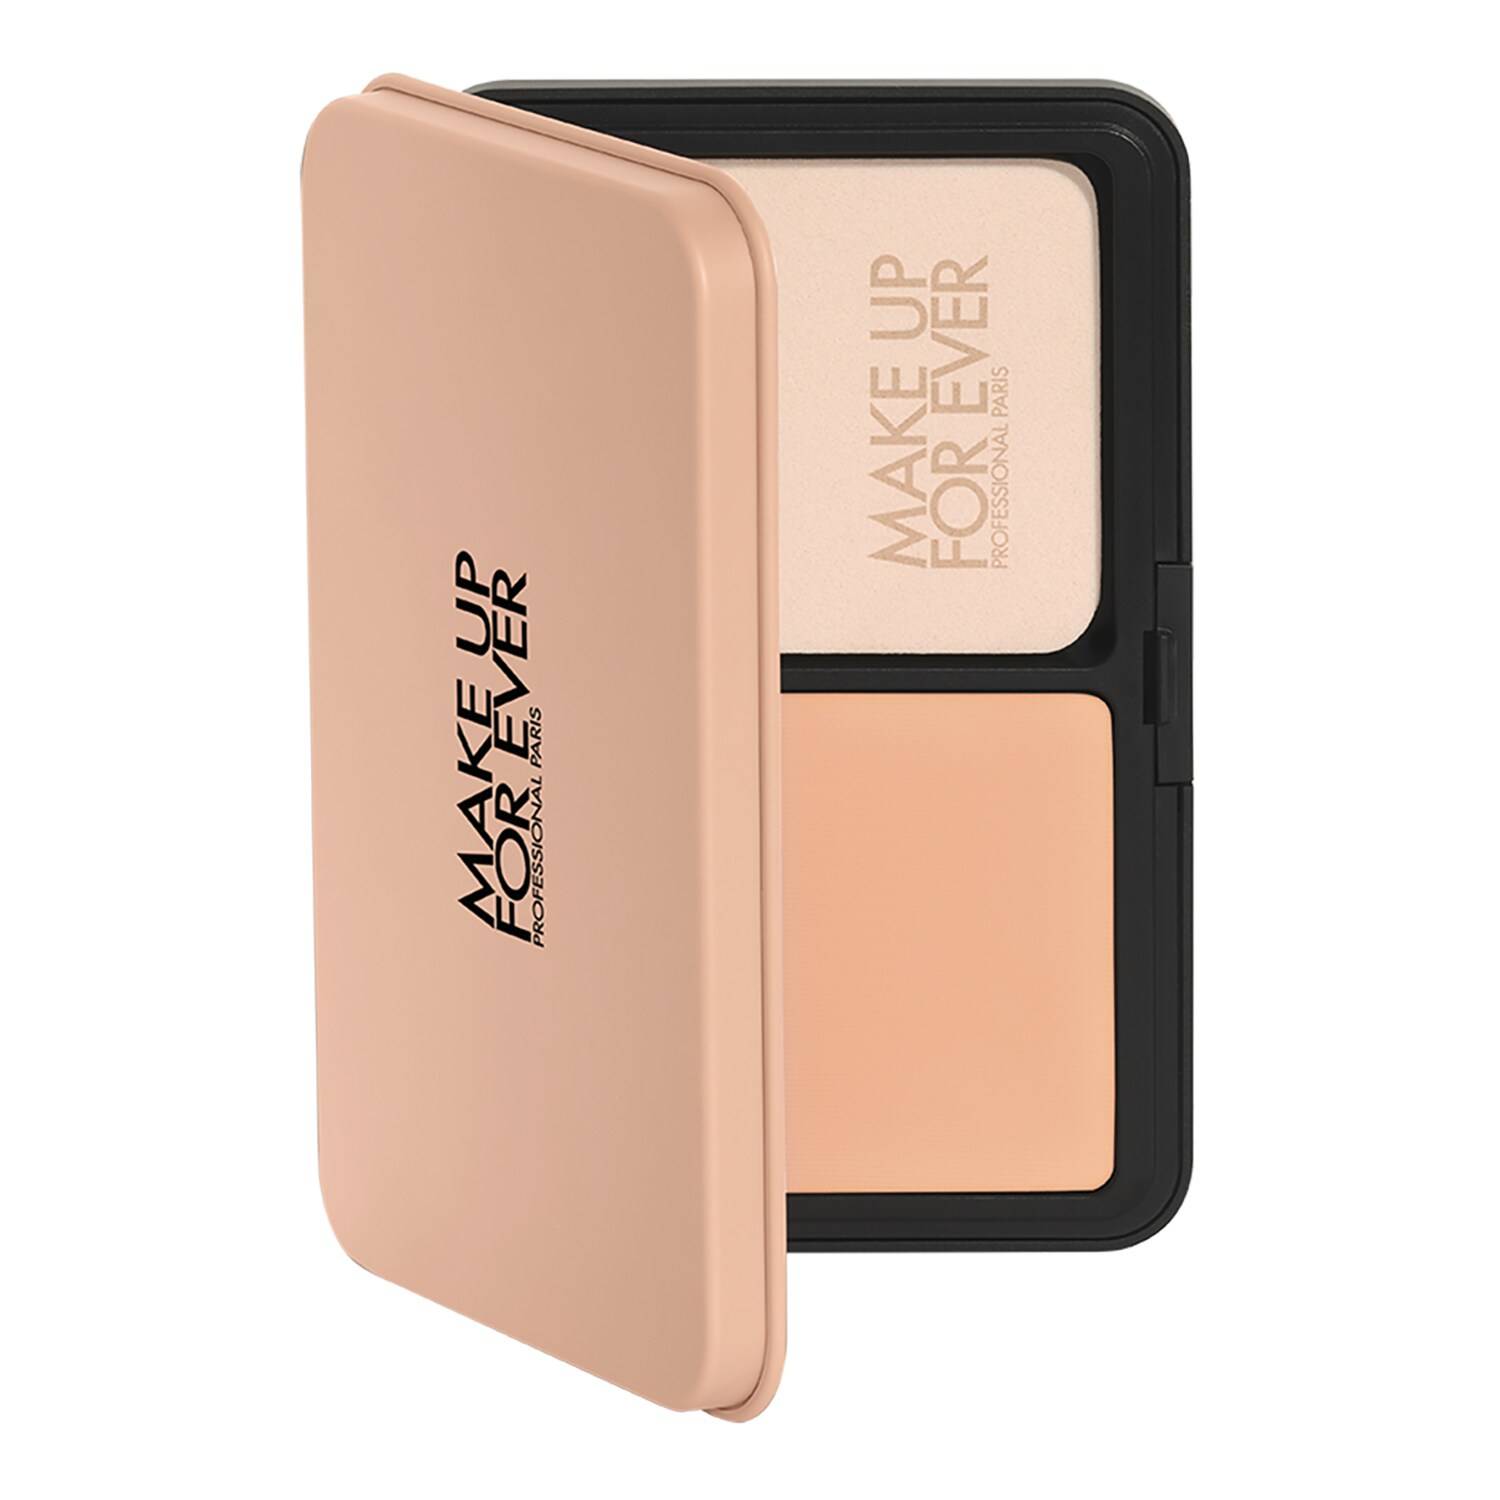 Make Up For Ever Hd Skin Powder Foundation 11G 2N22 - Nude 11G